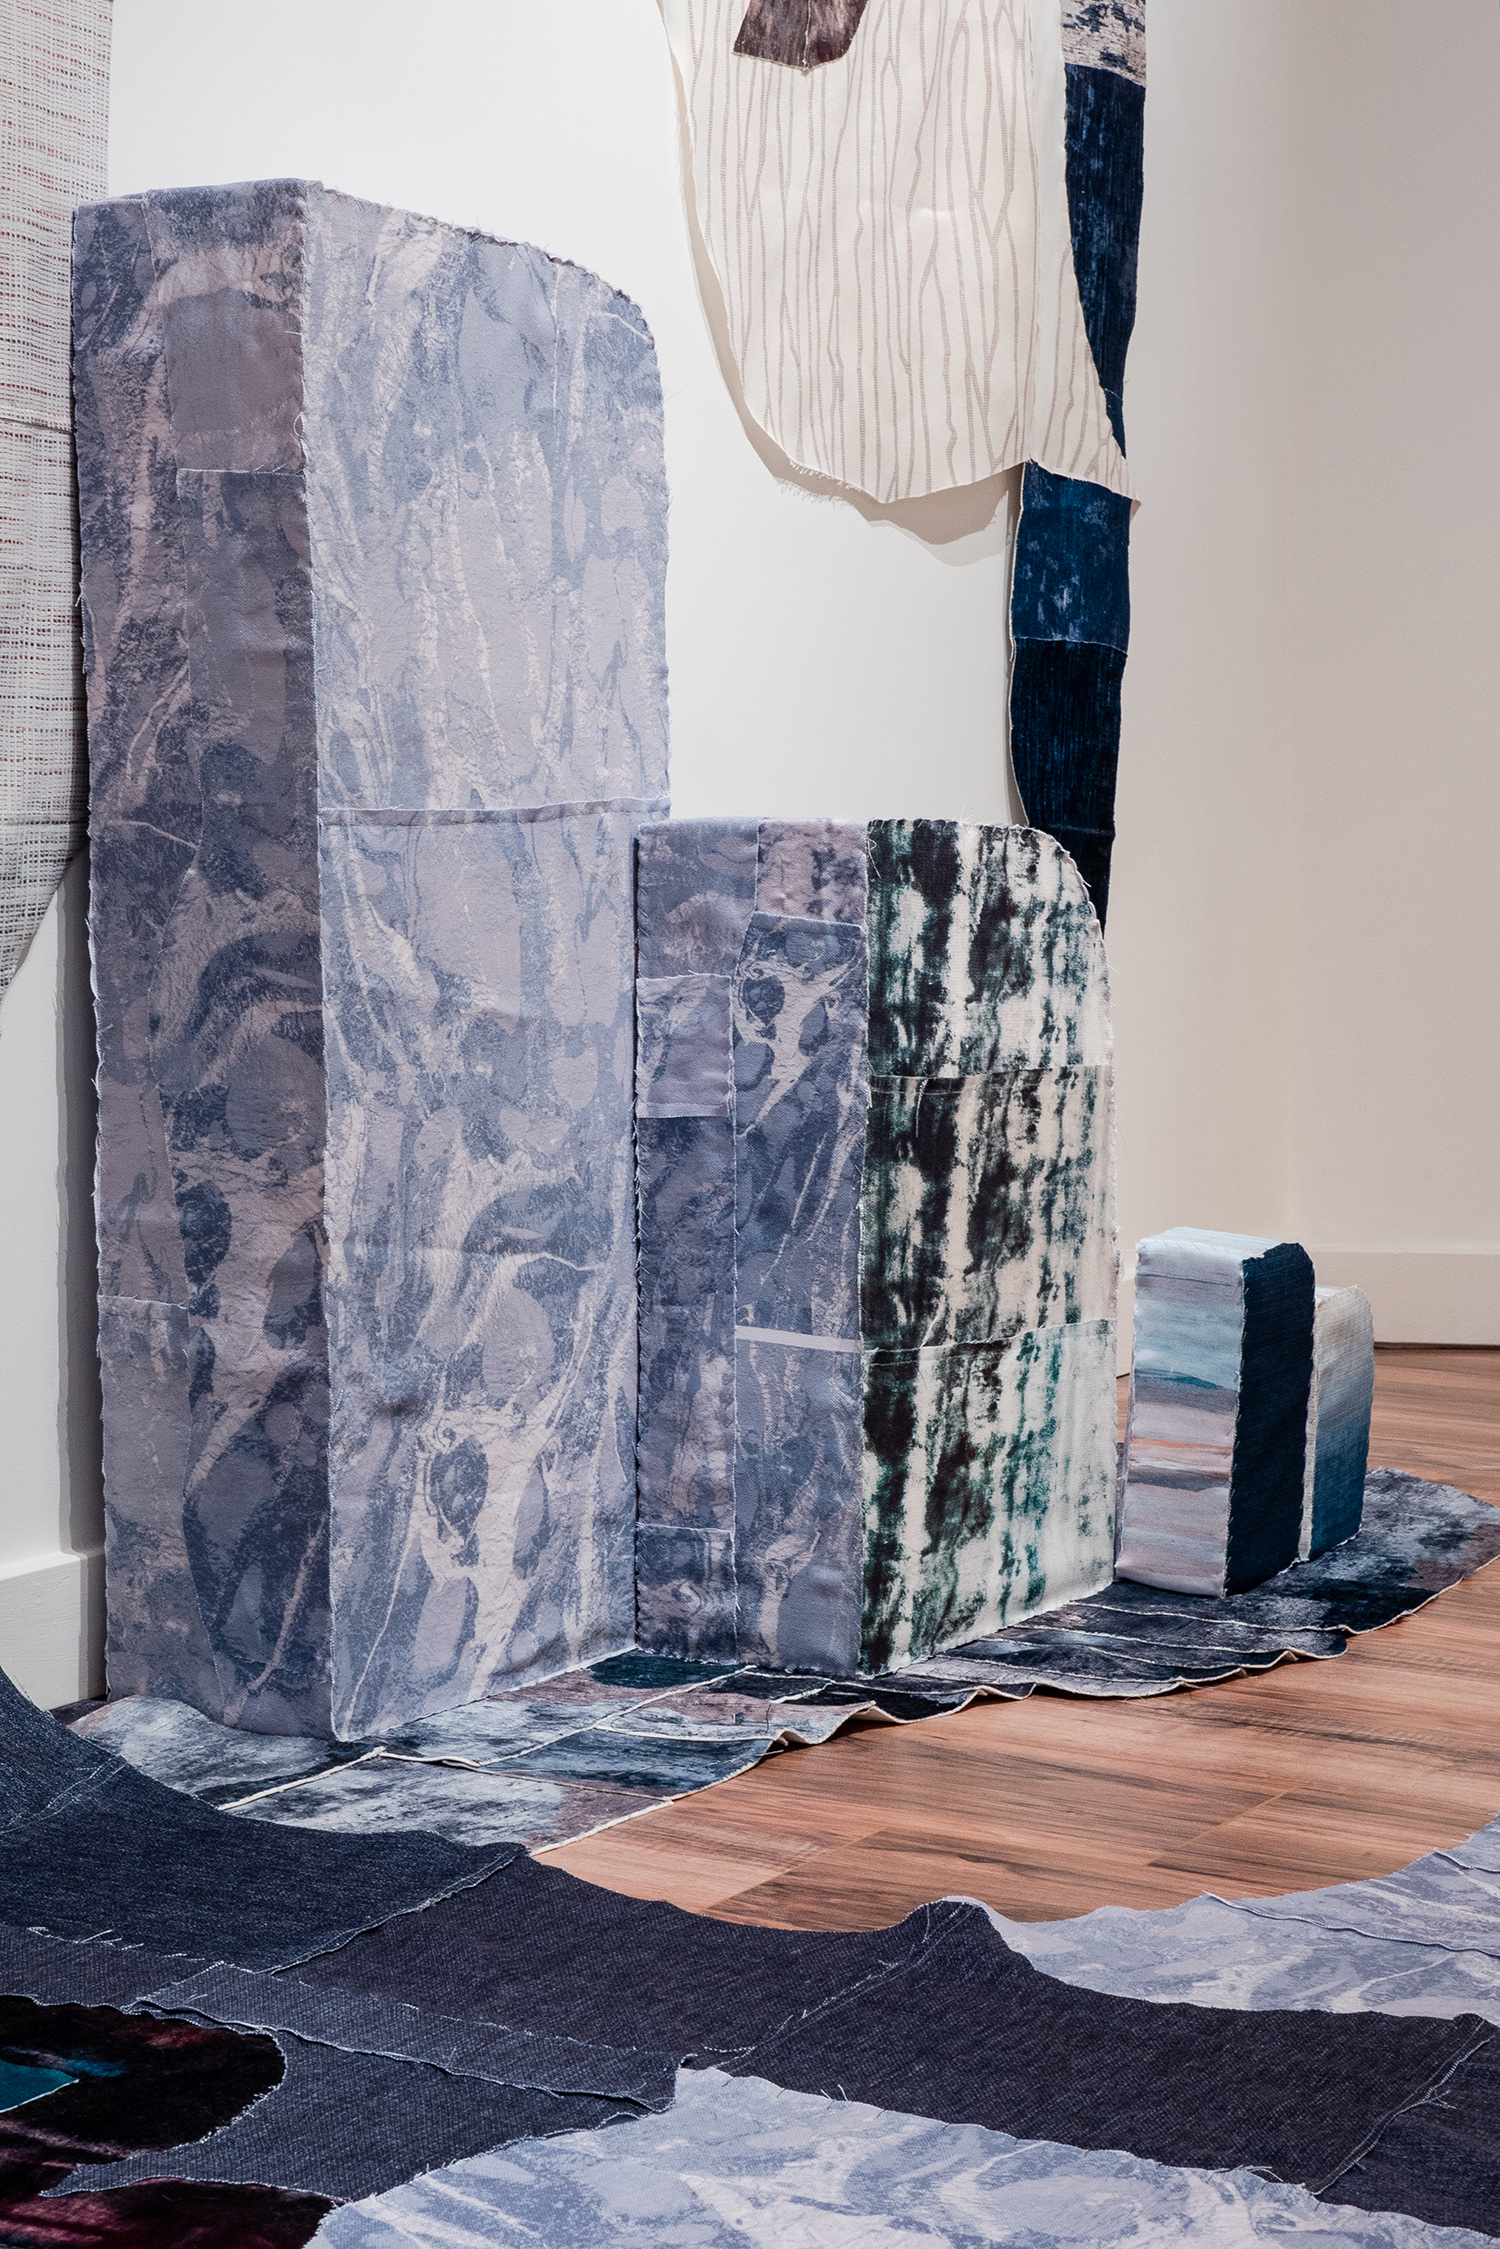 7 Worlds (Detail), 2020, Three-dimensional applique with reclaimed fabric and upcycled foam inserts, Dimensions variable (pictured: 16 x 9 x 4 ft)